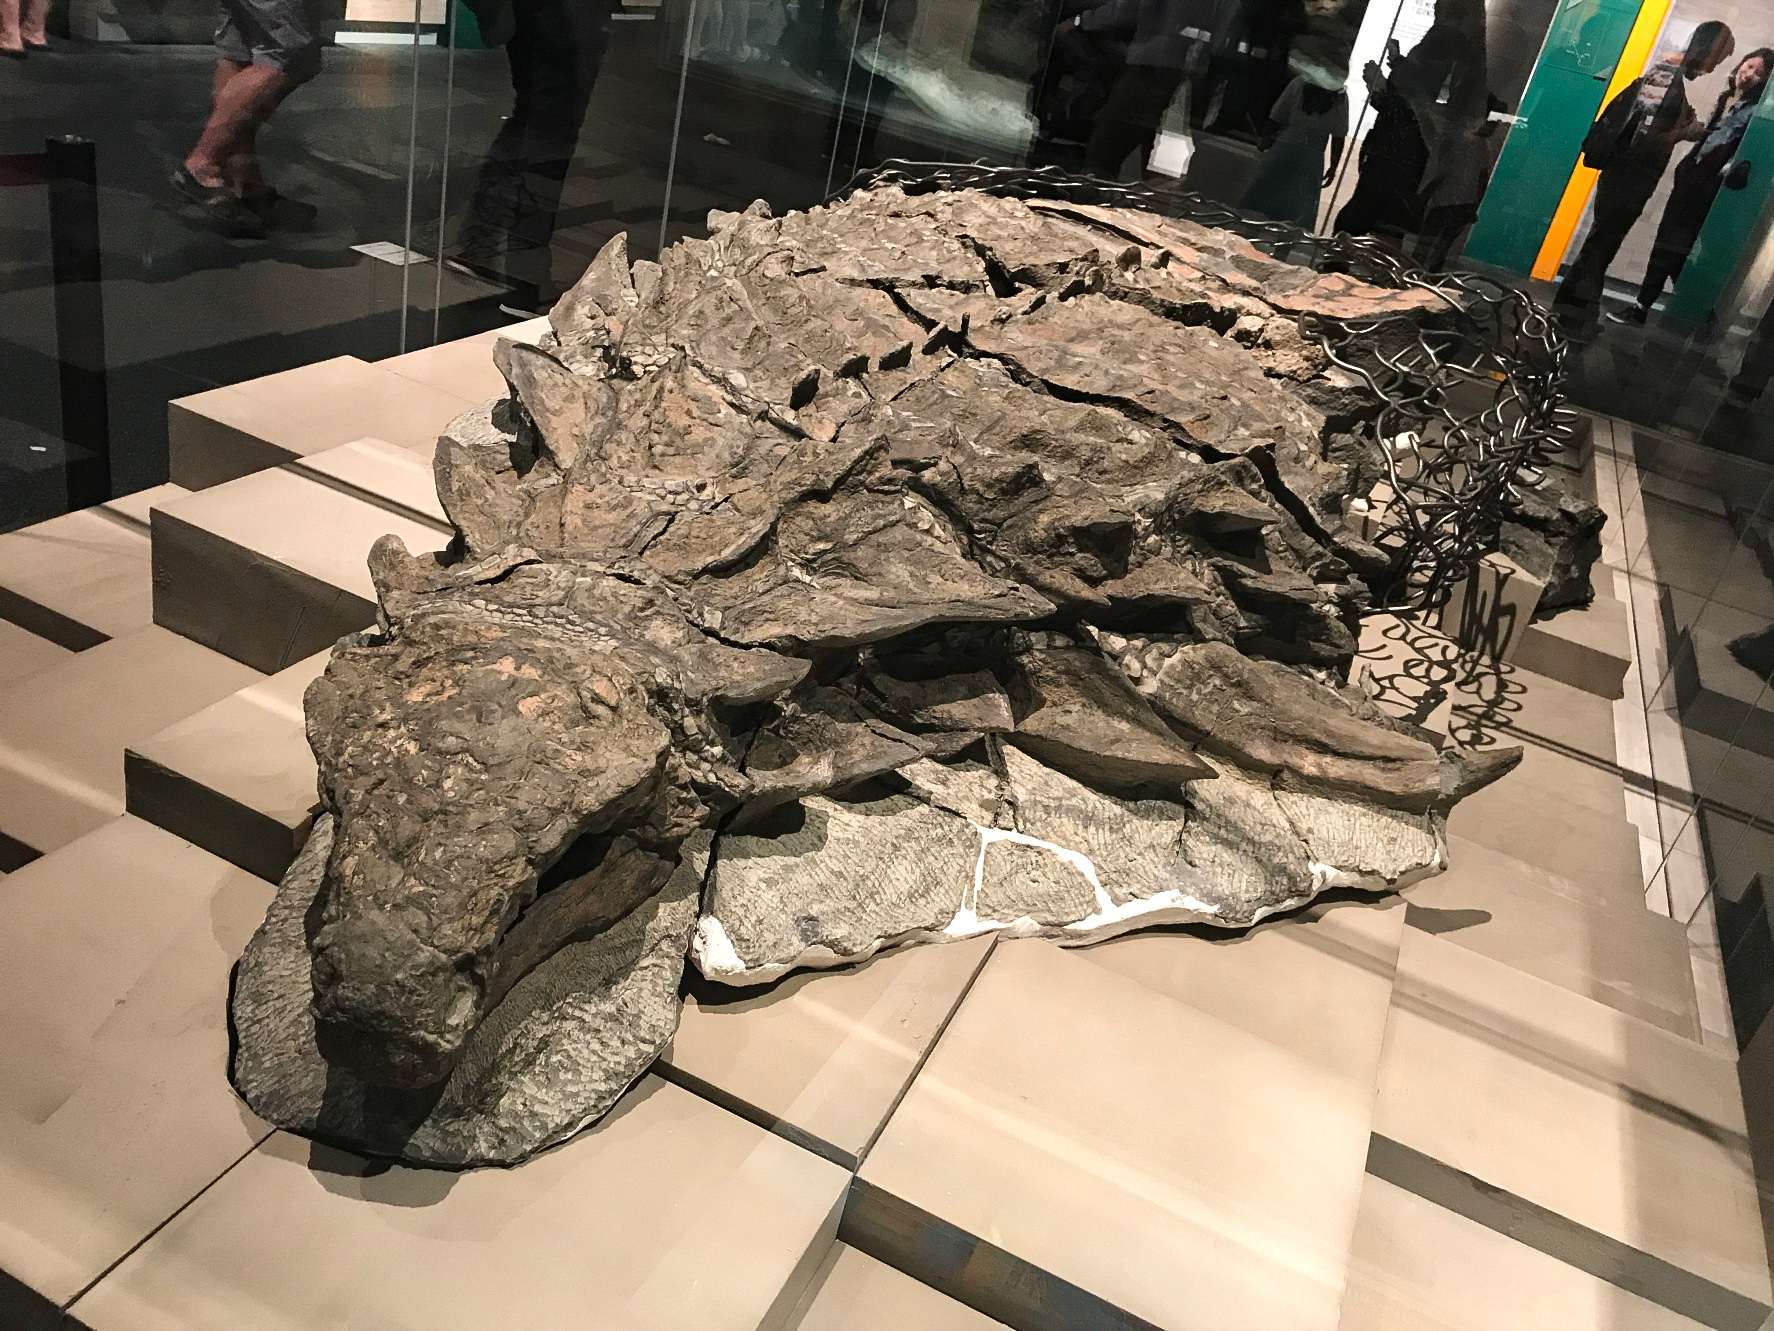 Borealopelta (meaning "Northern shield") is a genus of nodosaurid ankylosaur from the Early Cretaceous of Alberta, Canada. It contains a single species, B. markmitchelli, named in 2017 by Caleb Brown and colleagues from a well-preserved specimen known as the Suncor nodosaur.